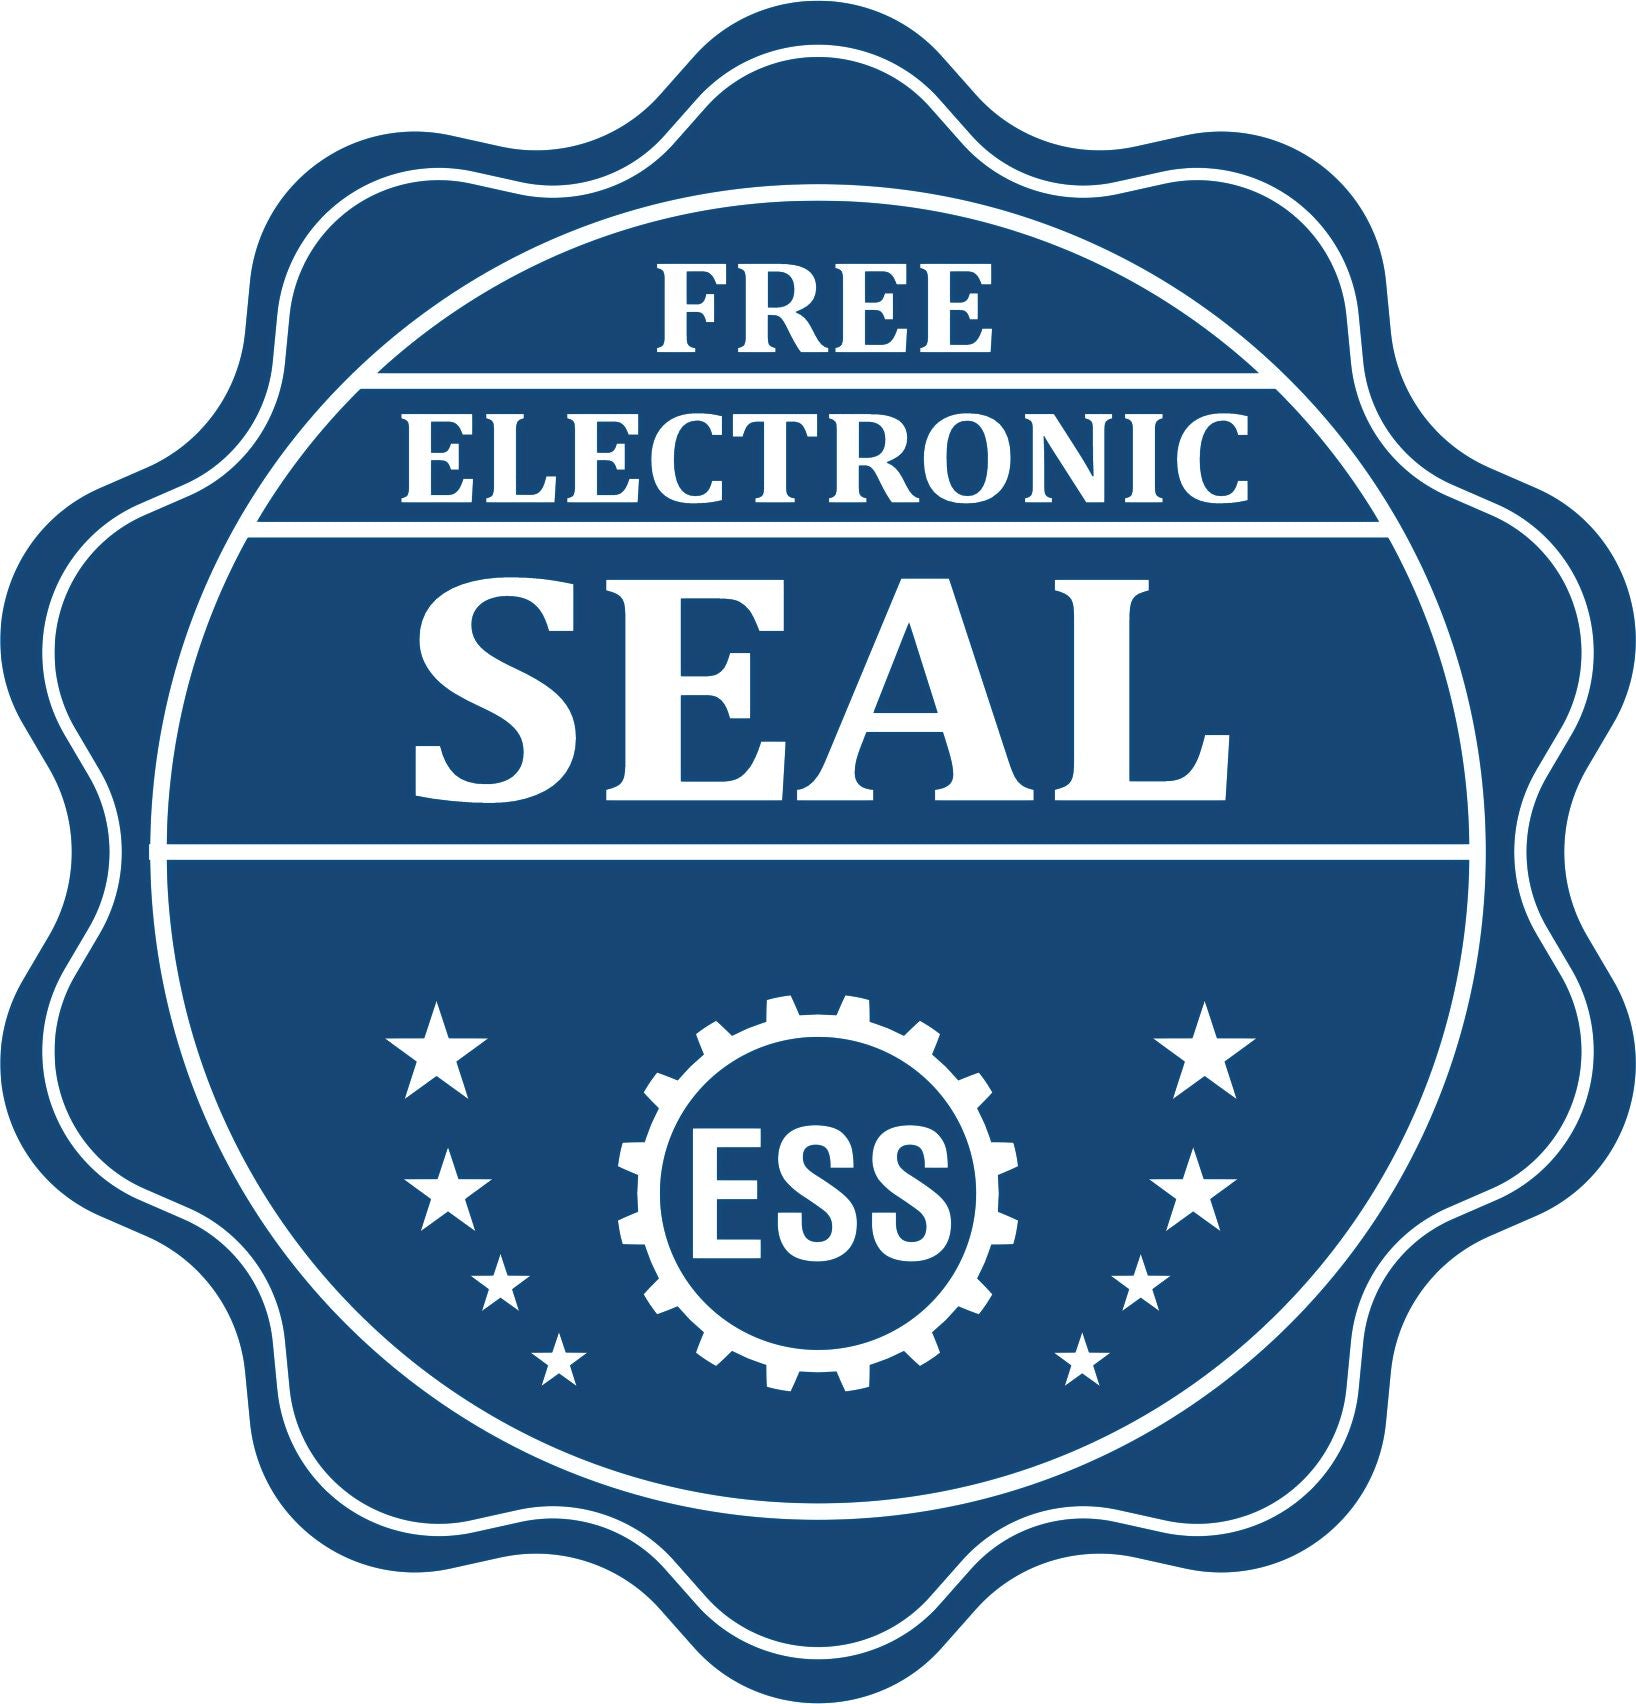 A badge showing a free electronic seal for the Handheld Louisiana Professional Geologist Embosser with stars and the ESS gear on the emblem.